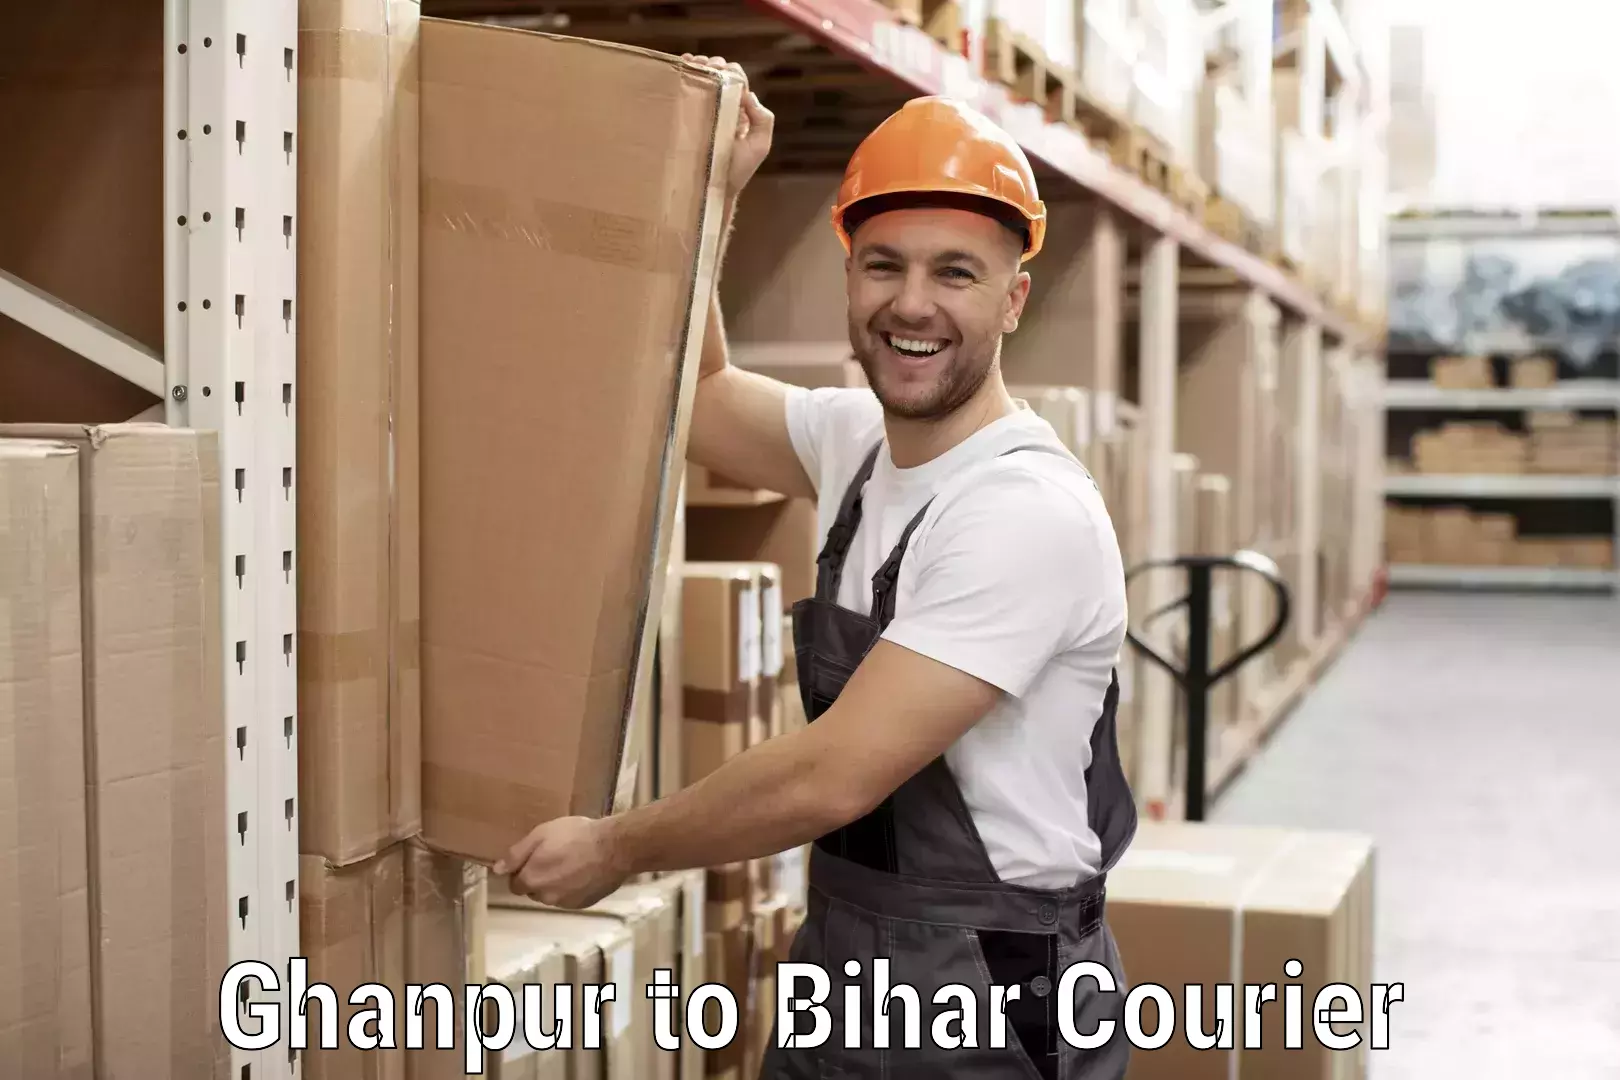 On-call courier service Ghanpur to Mashrakh